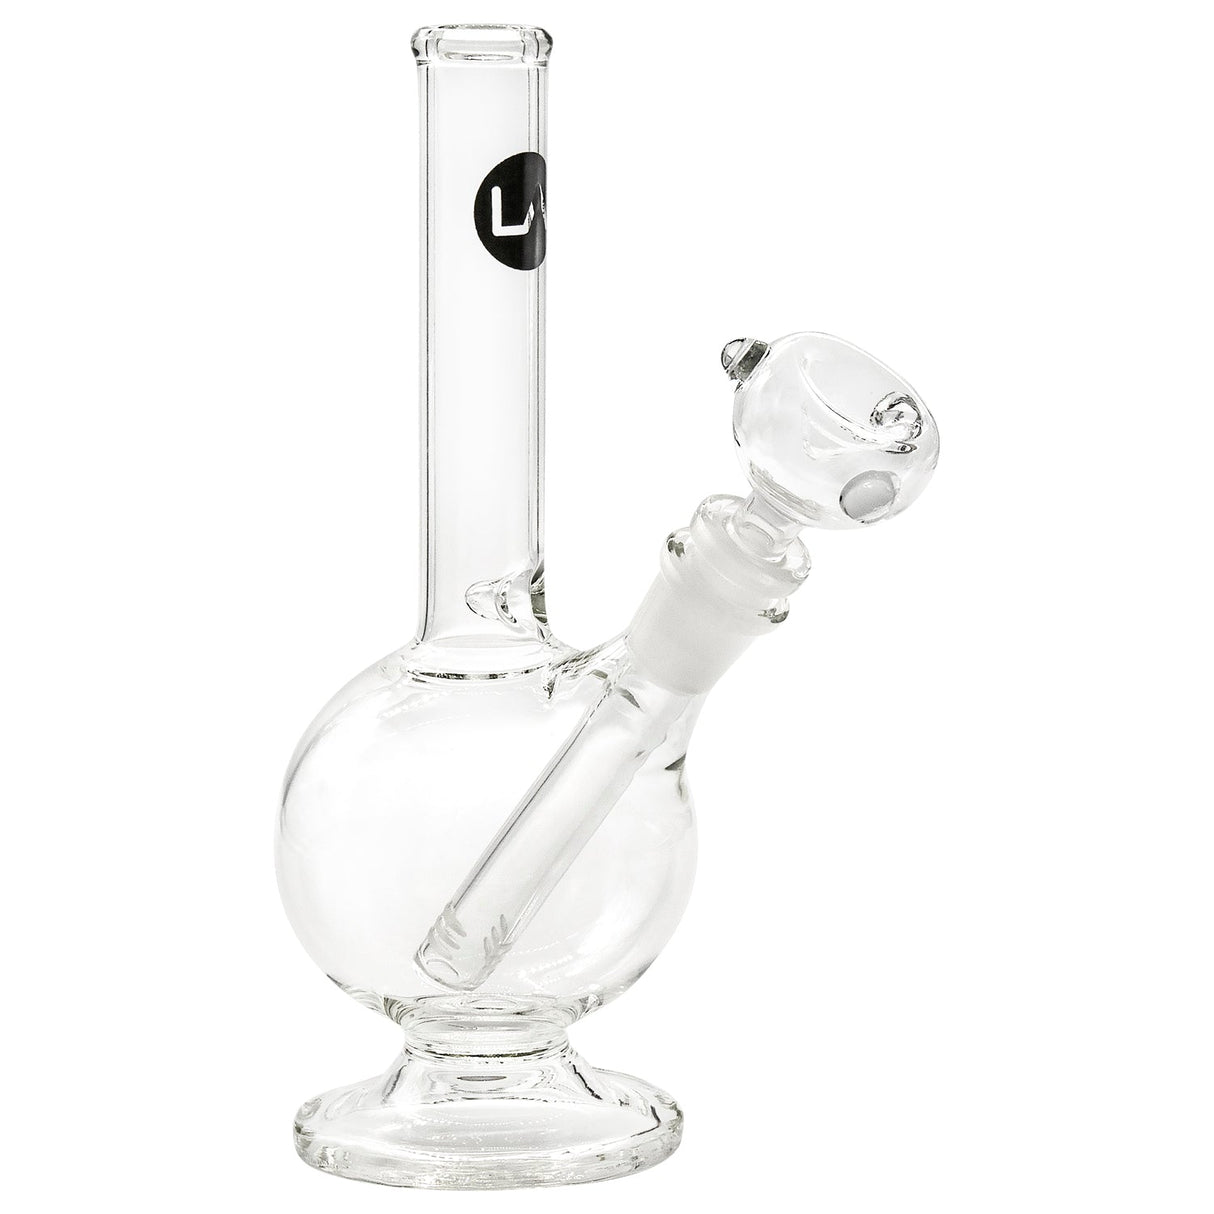 LA Pipes Pedestal Basic Bong in Borosilicate Glass with 45 Degree Joint Angle, Front View